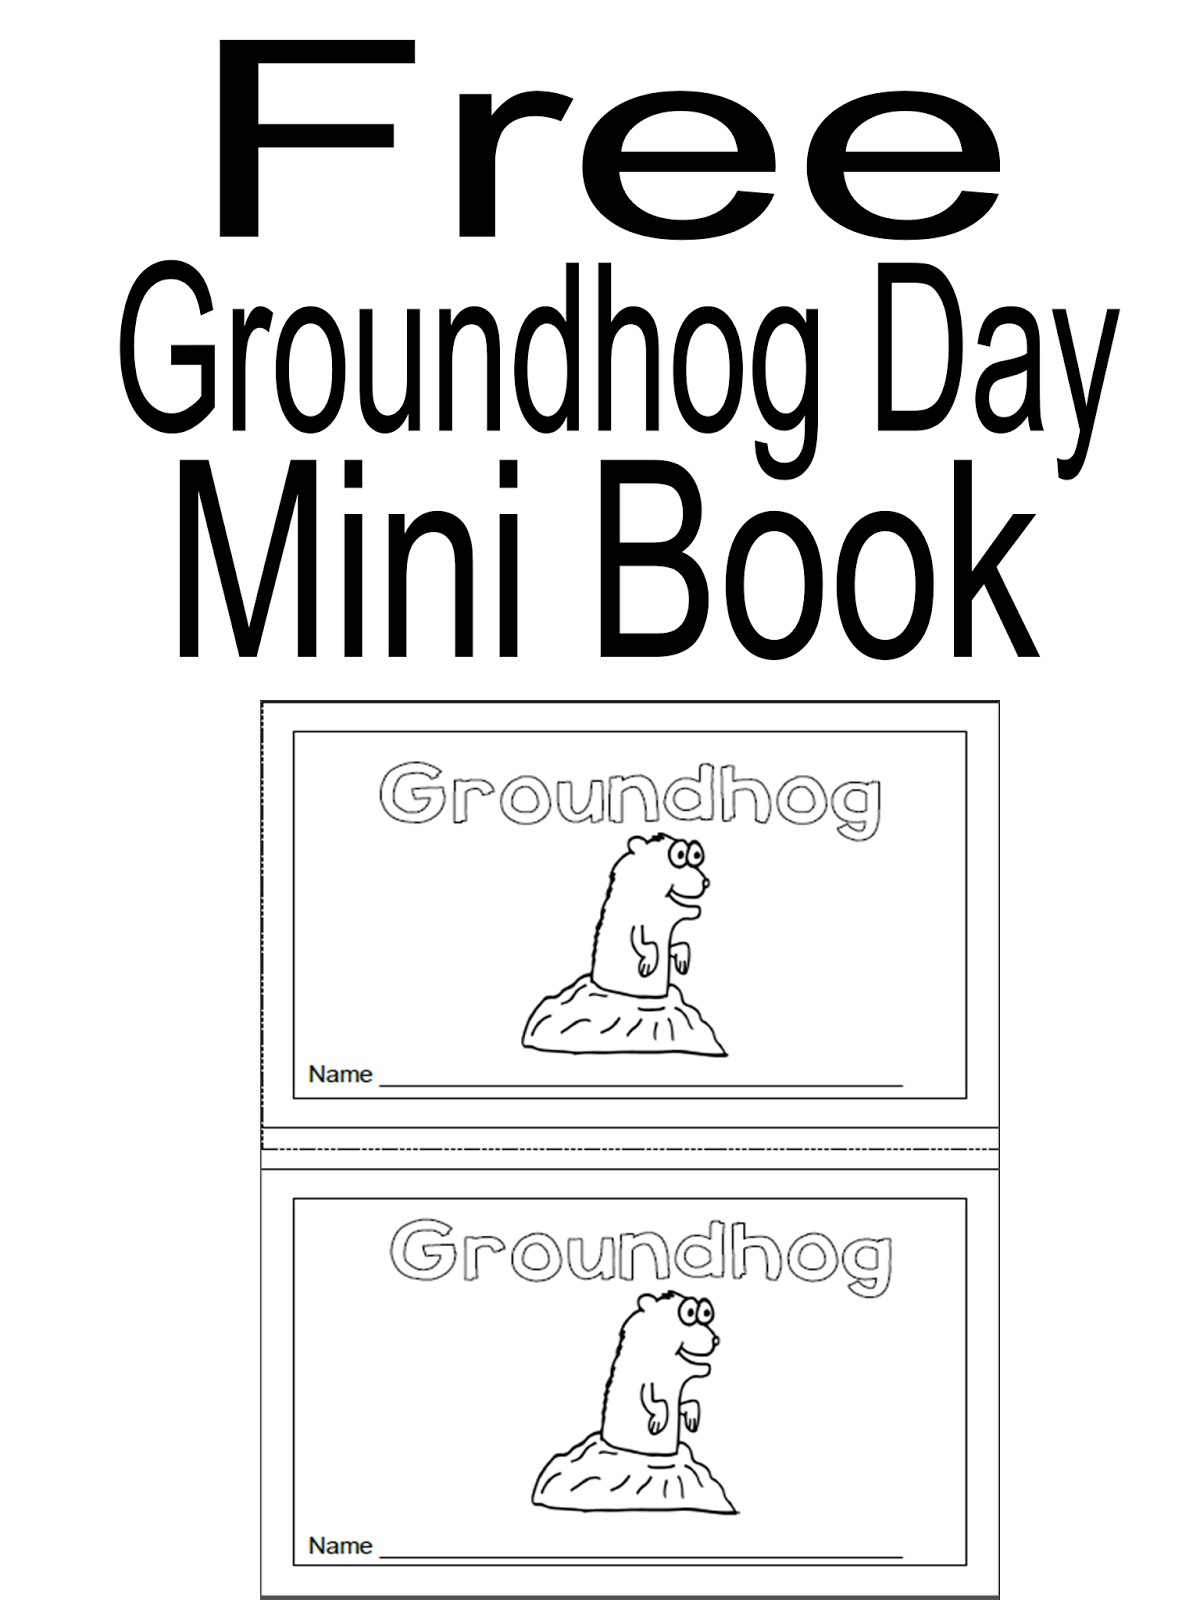 Simply Centers: Free Groundhog Day Mini Book regarding Free Printable Groundhog Day Booklet